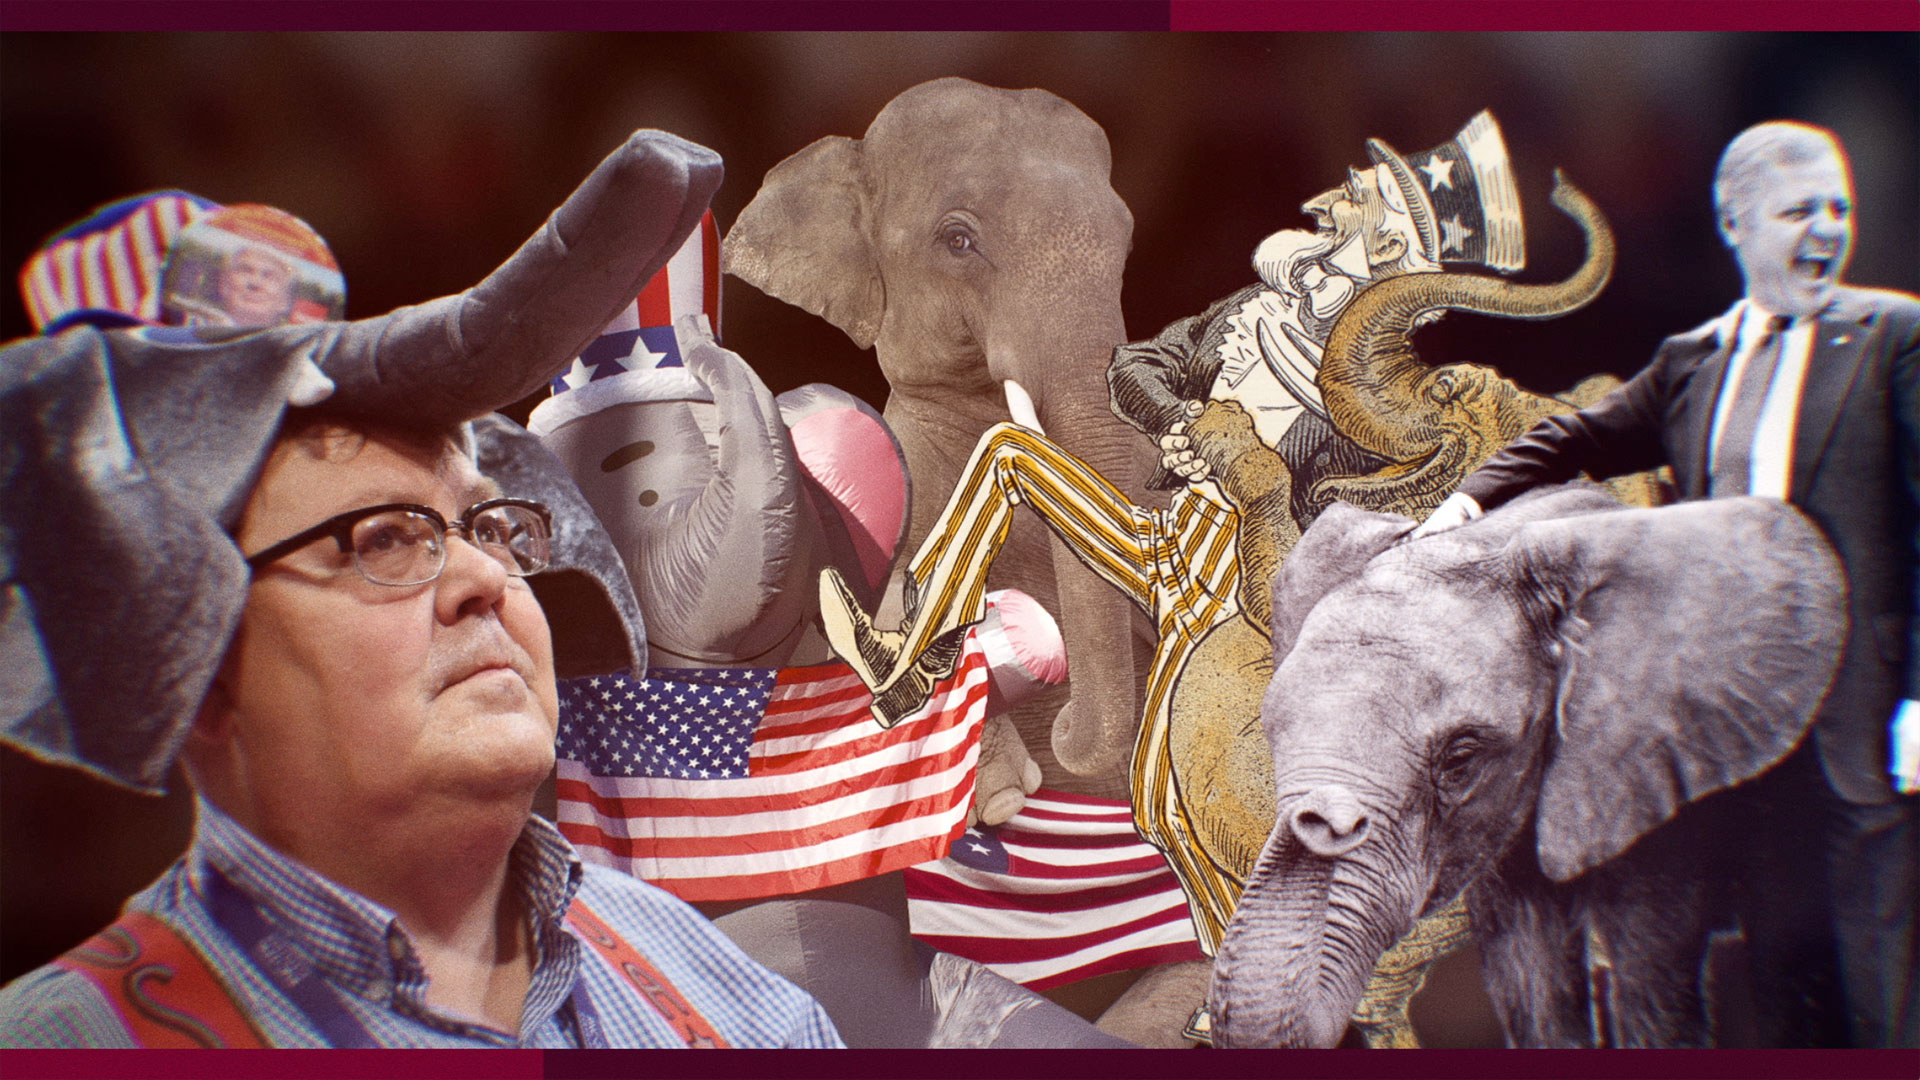 Why Republicans are linked to Elephants